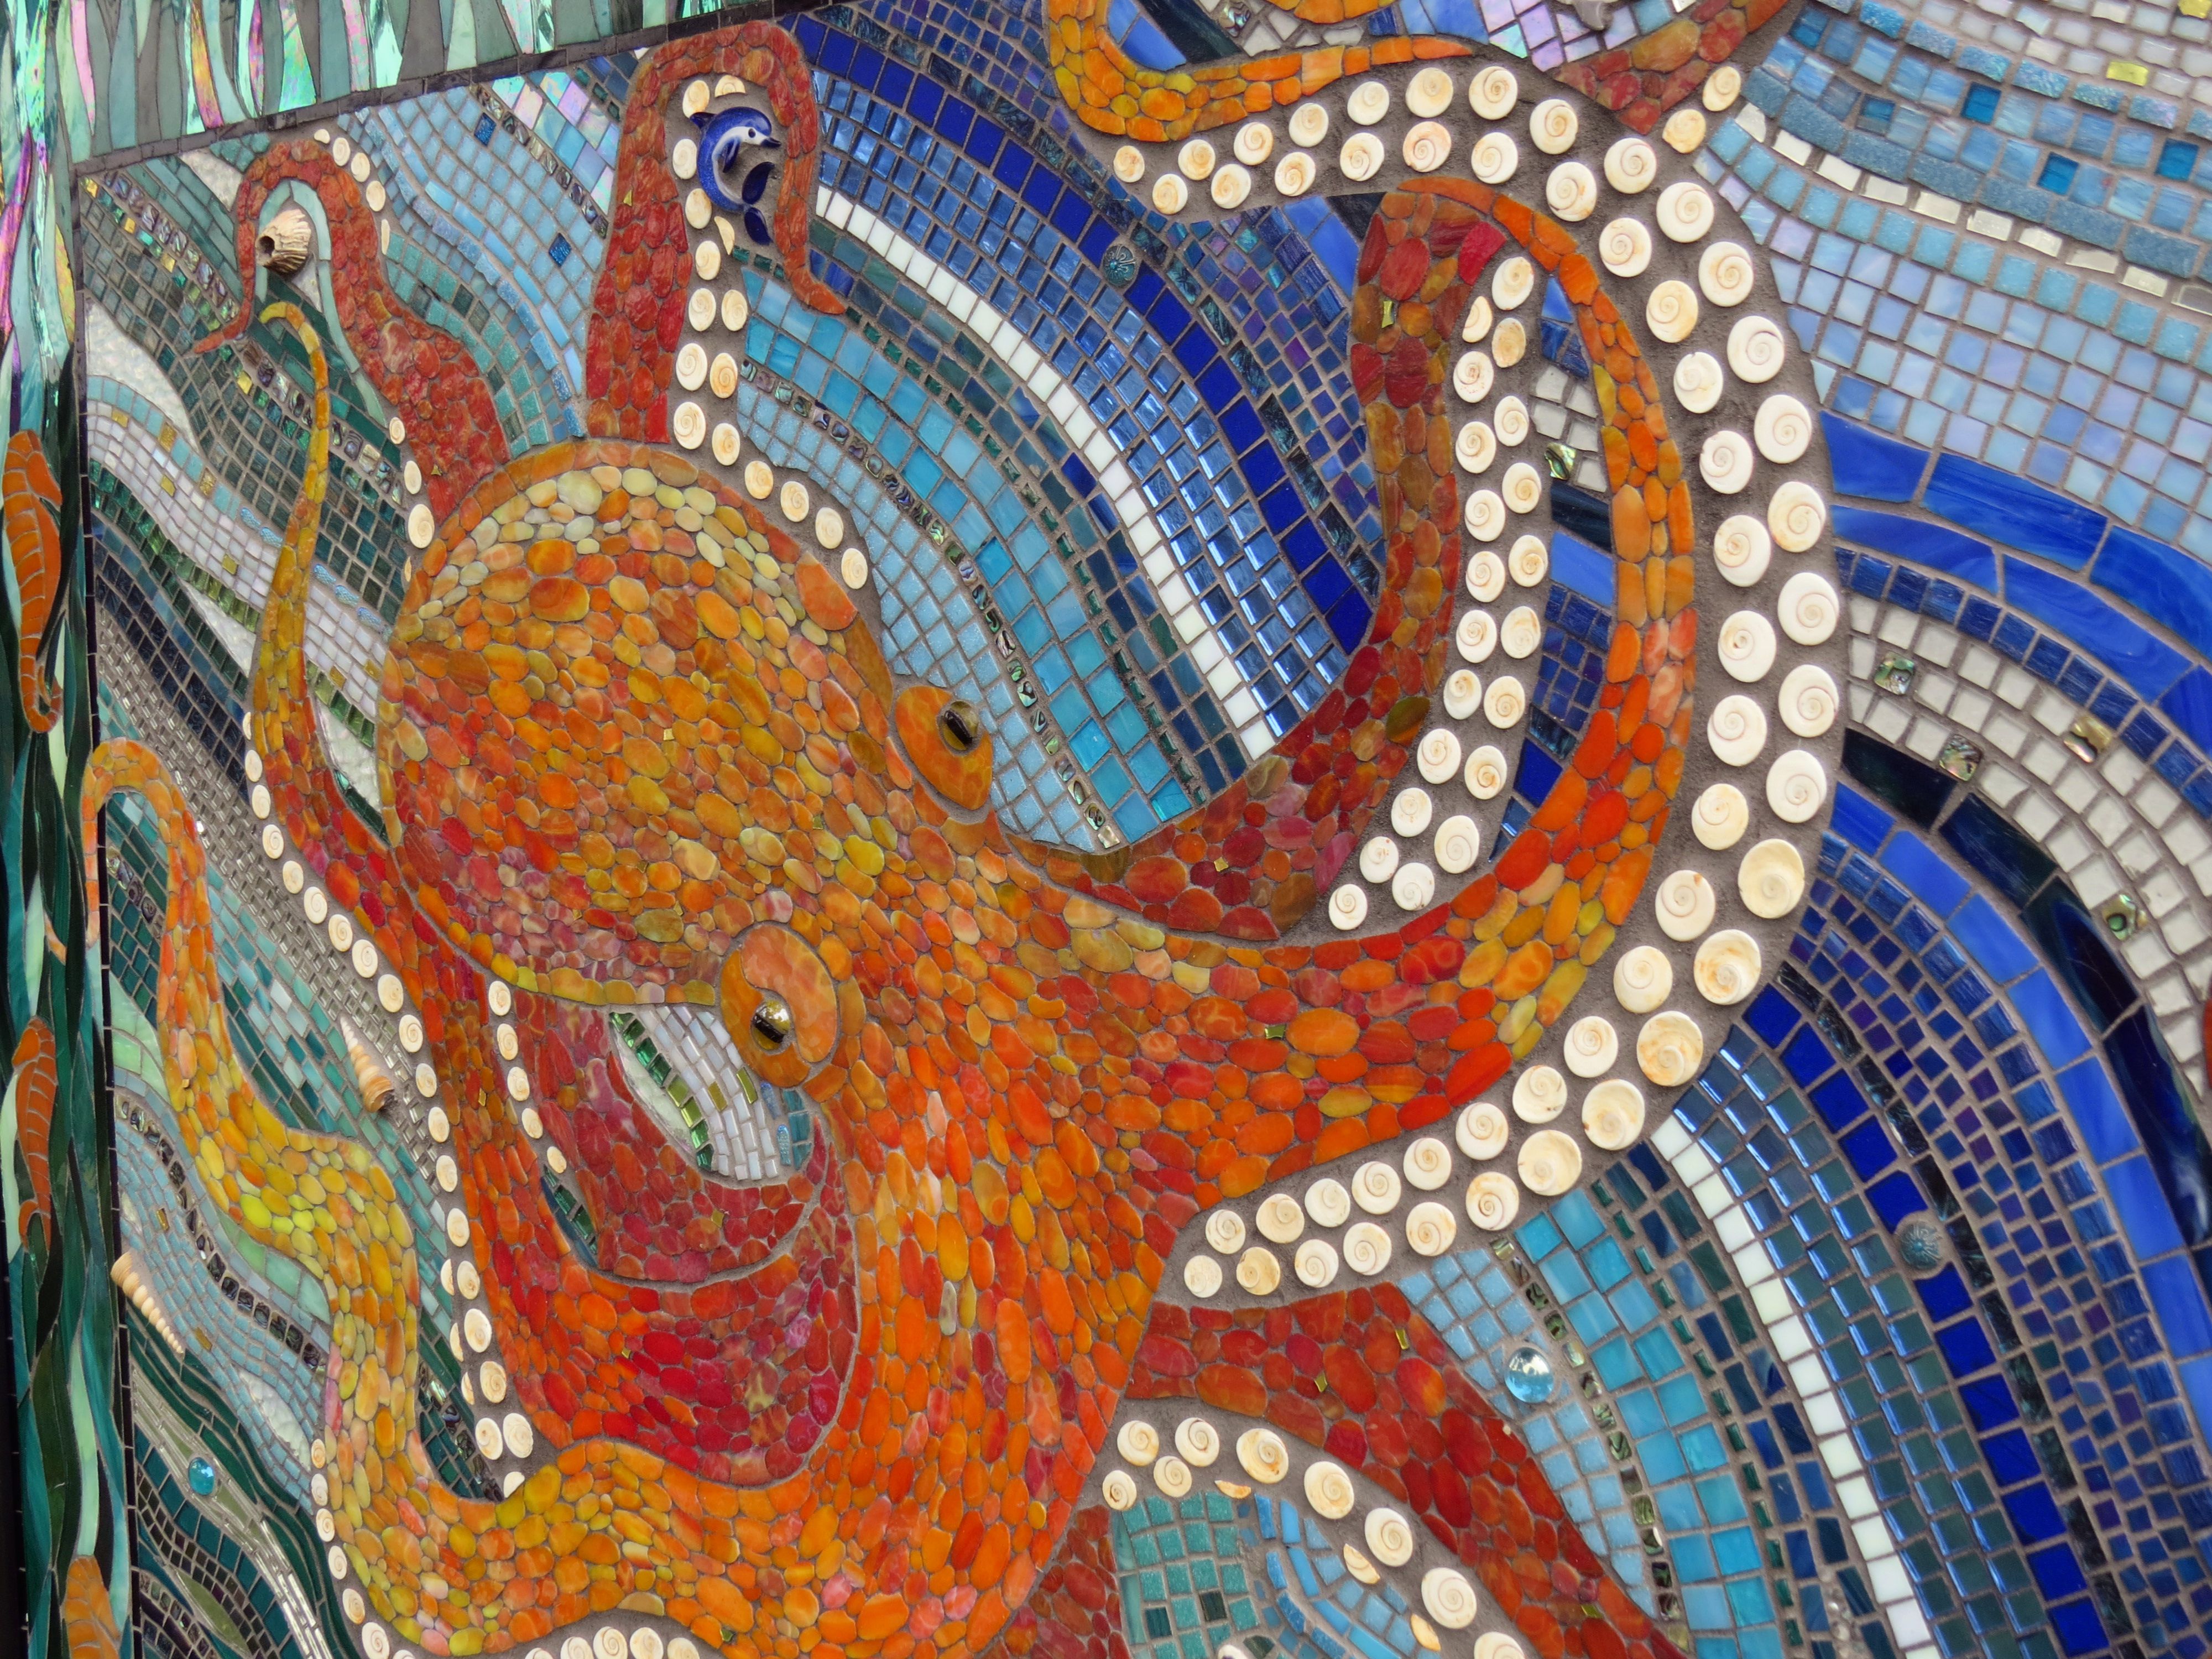 Buy Custom Made Octopus Mosaic, made to order from Made for Mosaics Tiled Pieces Used In Making Mosaics